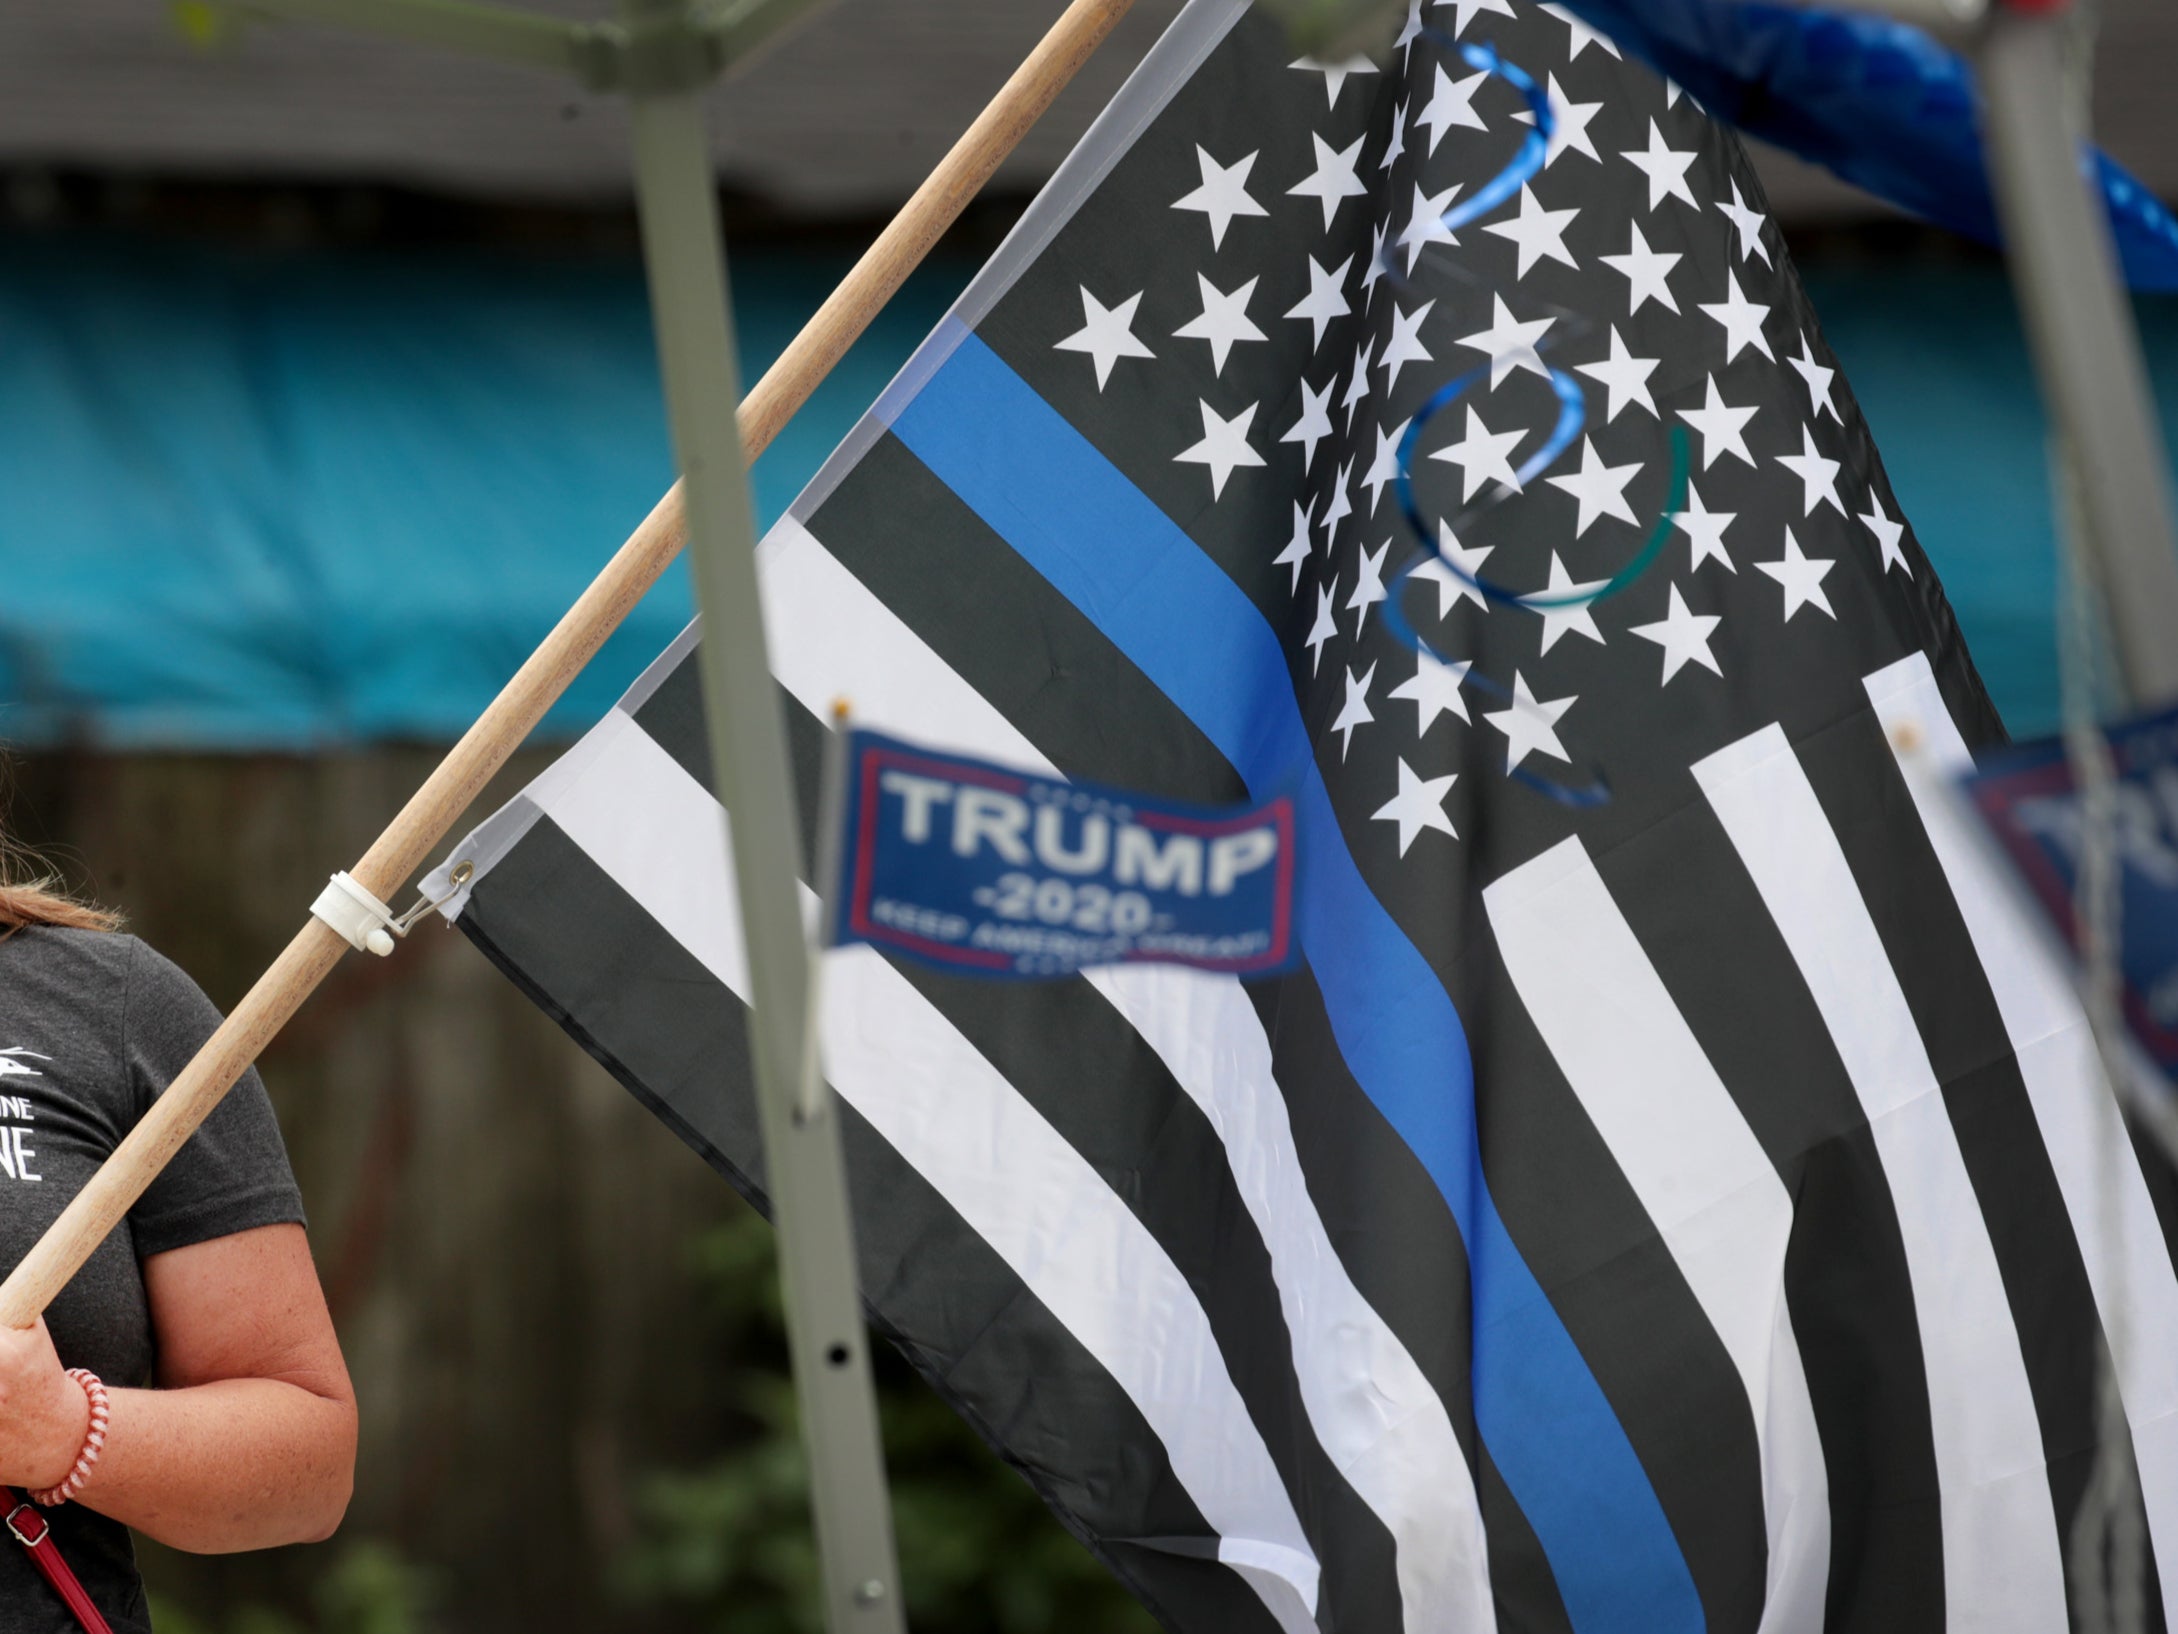 A flag at a ‘Back the Blue’ rally near the Homan Square police station on August 15, 2020 in Chicago, Illinois